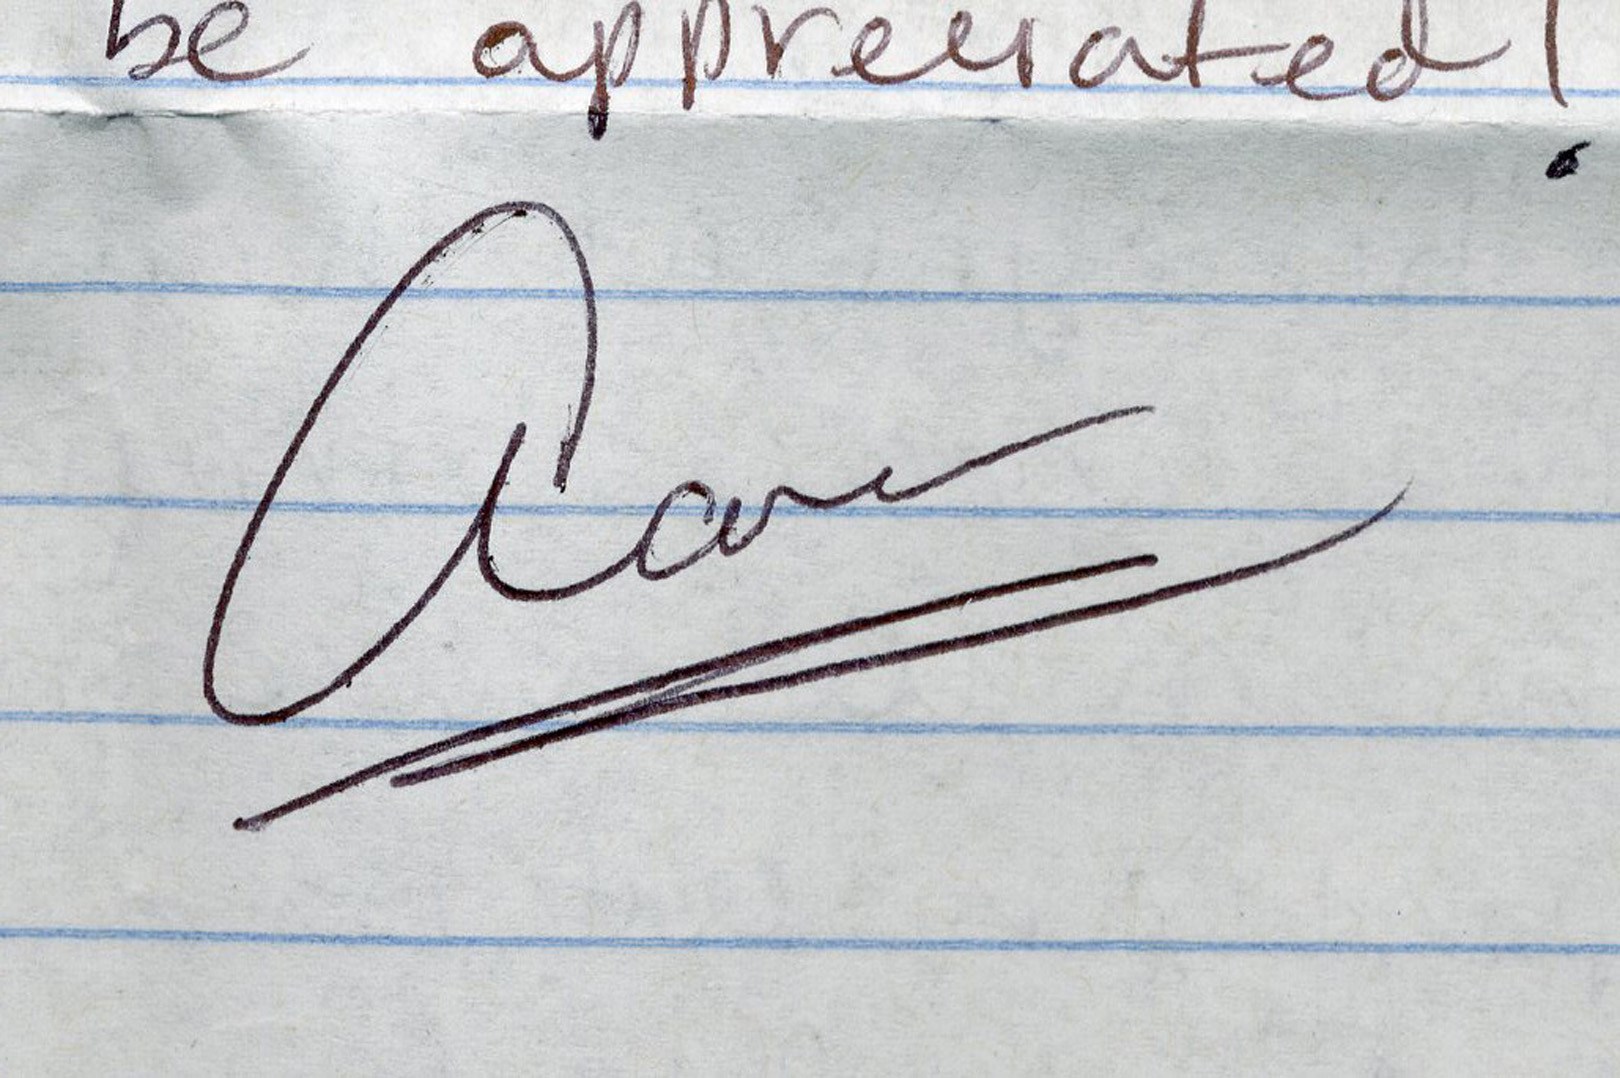 Aaron Hernandez "Stay Out of Trouble" Handwritten Letter with "Unknown Substance"